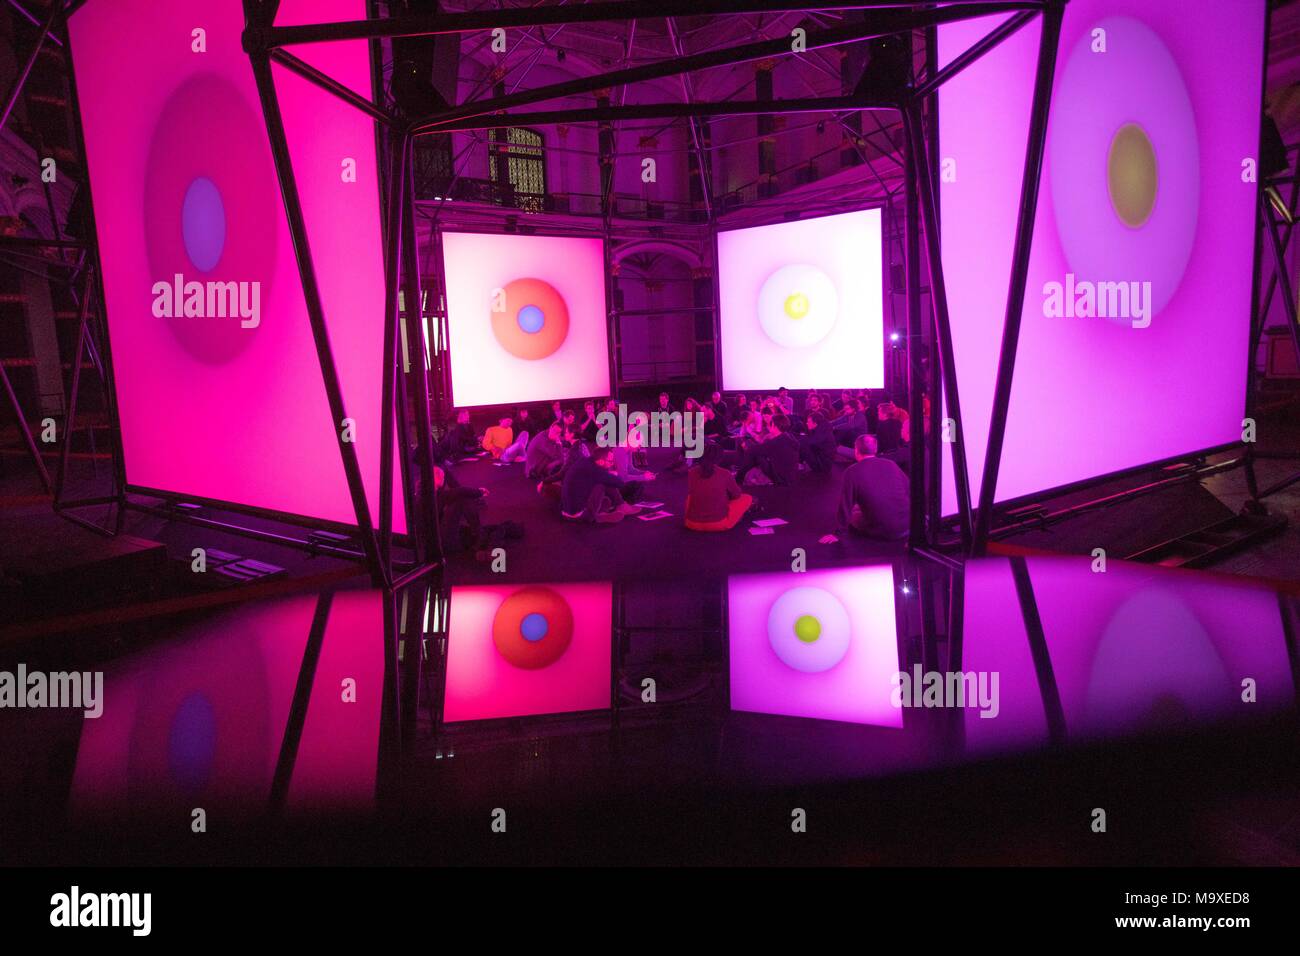 29 March 2018, Germany, Berlin: The installation 'Empty Formalism' by Brian Eno in the 'ISM Hexadome' in the Martin Gropius Building reflected by a smartphone. The installation displays colourful and continuously changing surfaces on canvas while spherical sounds play. The work is part of the exhibition 'ISM Hexadome'. Photo: Jörg Carstensen/dpa Stock Photo